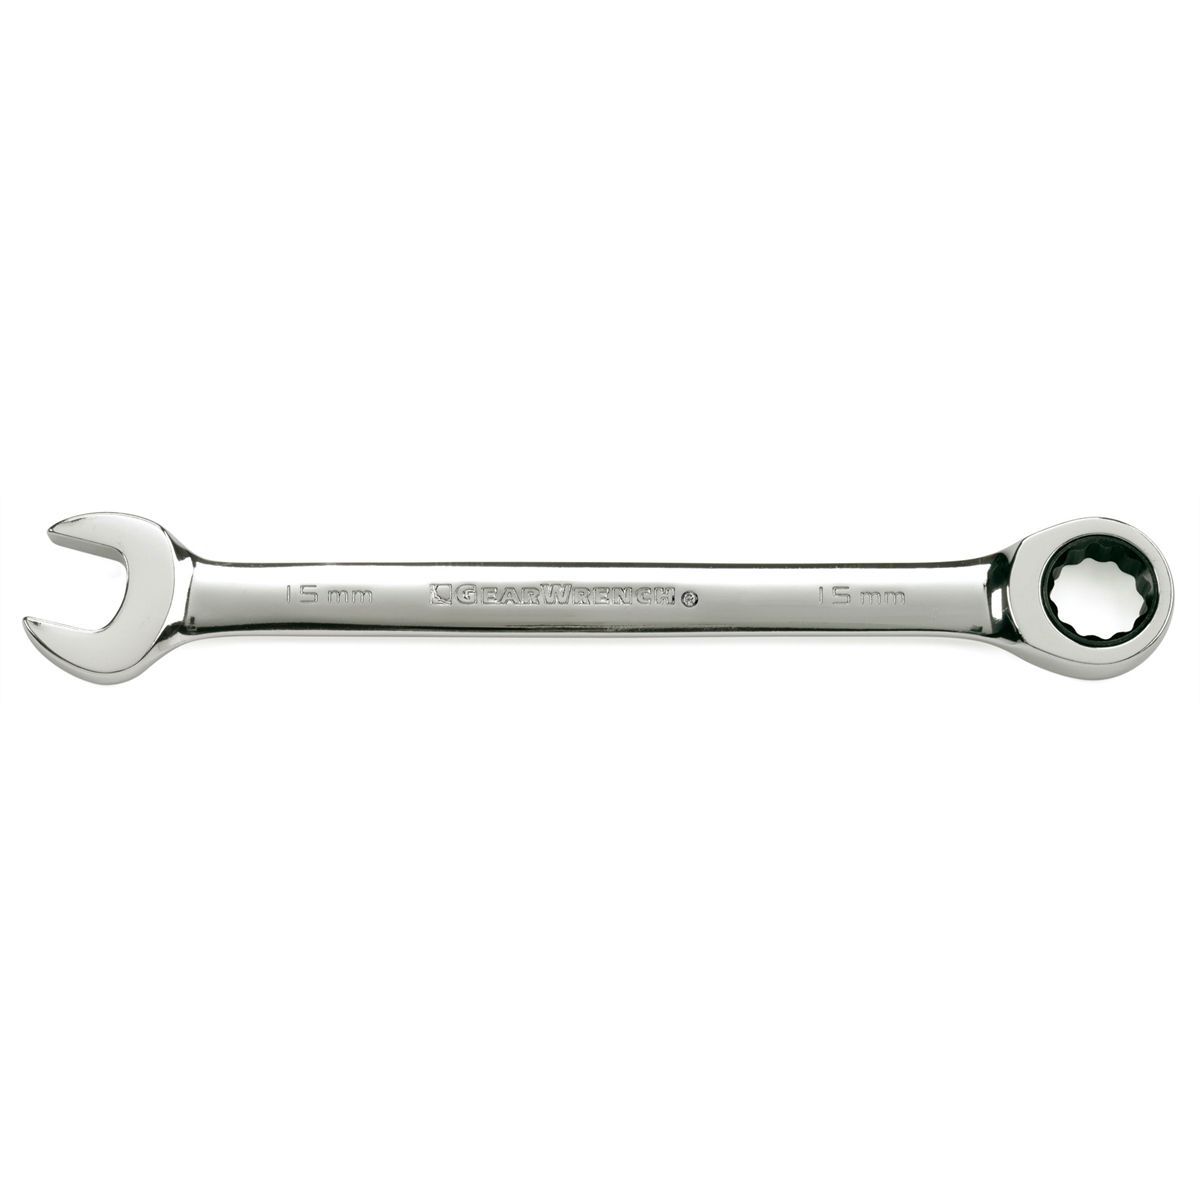 Wrench Ratcheting Combination - 12mm Gearwrench